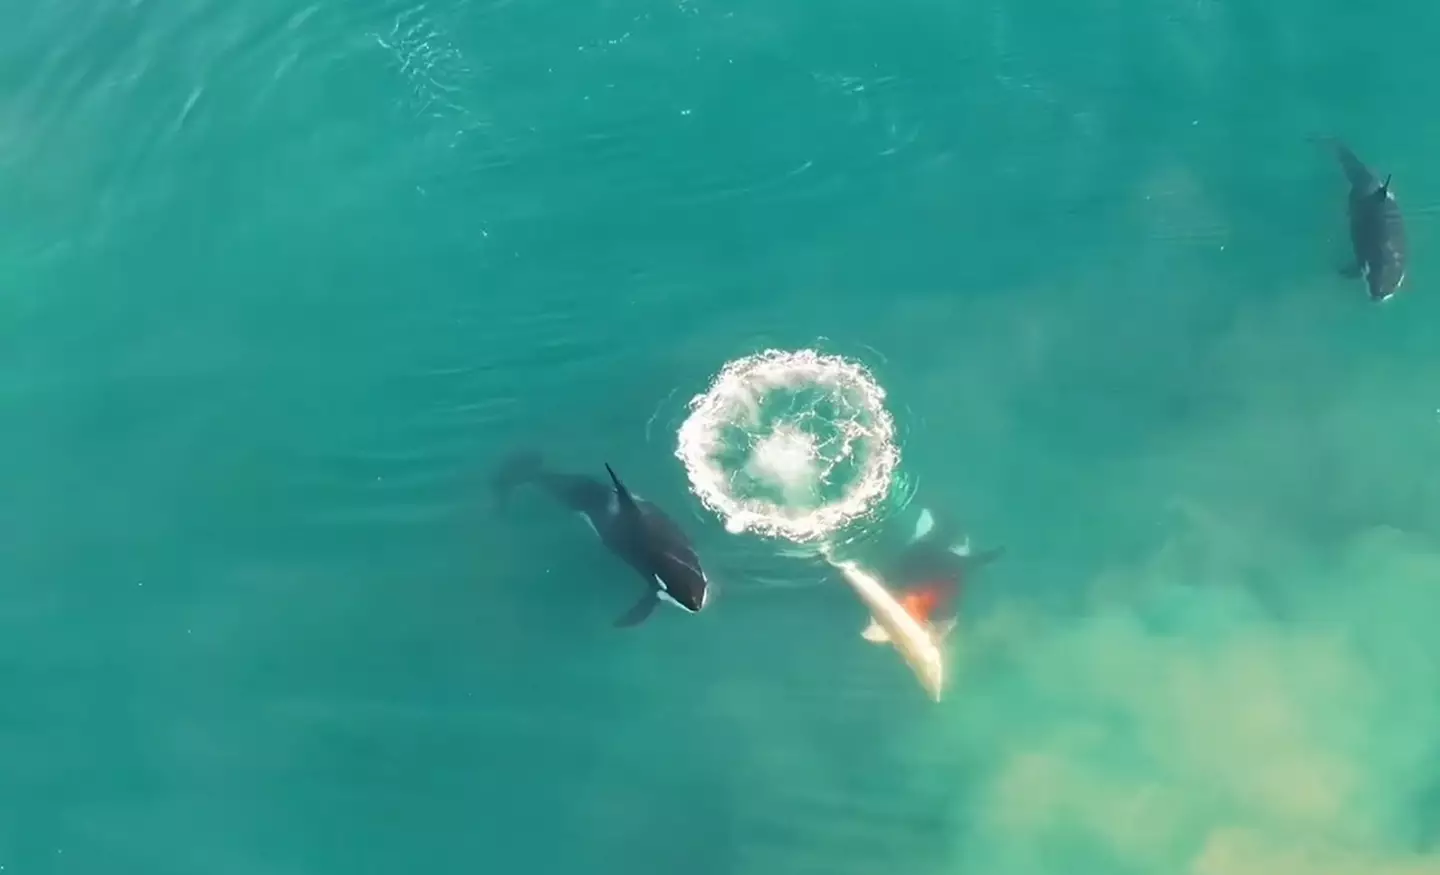 This historic drone footage helps understand the way sharks behave.